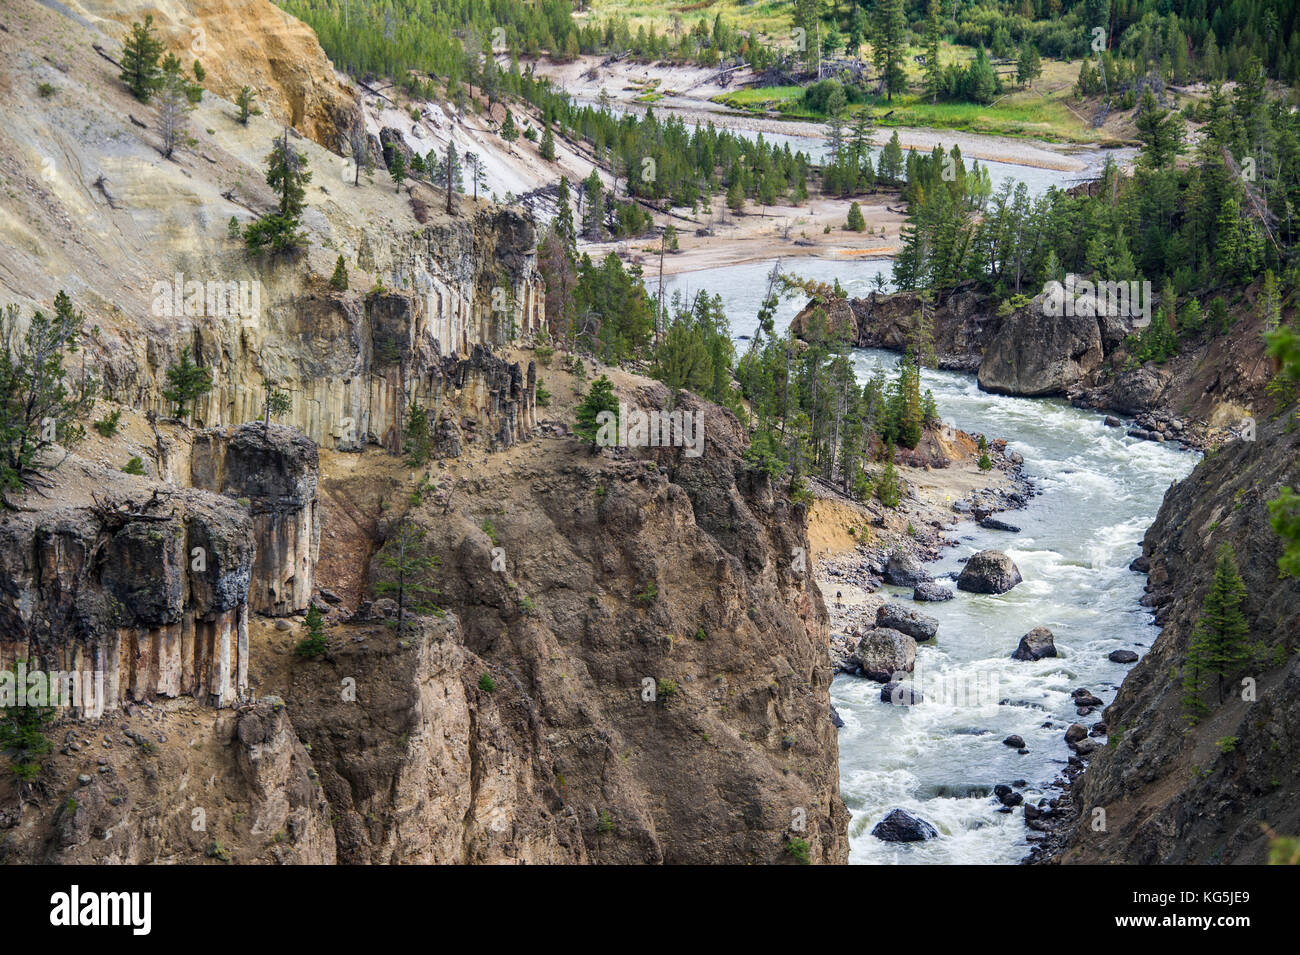 The Yellowstone river flowing through a sandstone gorge in the Yellowstone National Park, Wyoming, USA Stock Photo